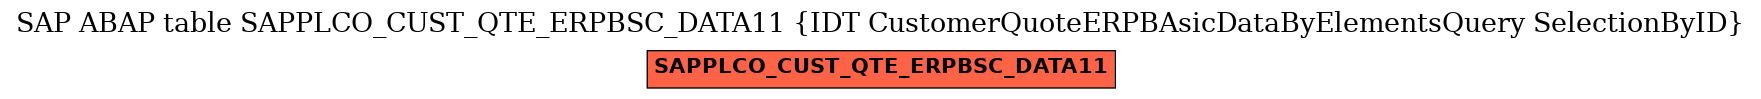 E-R Diagram for table SAPPLCO_CUST_QTE_ERPBSC_DATA11 (IDT CustomerQuoteERPBAsicDataByElementsQuery SelectionByID)